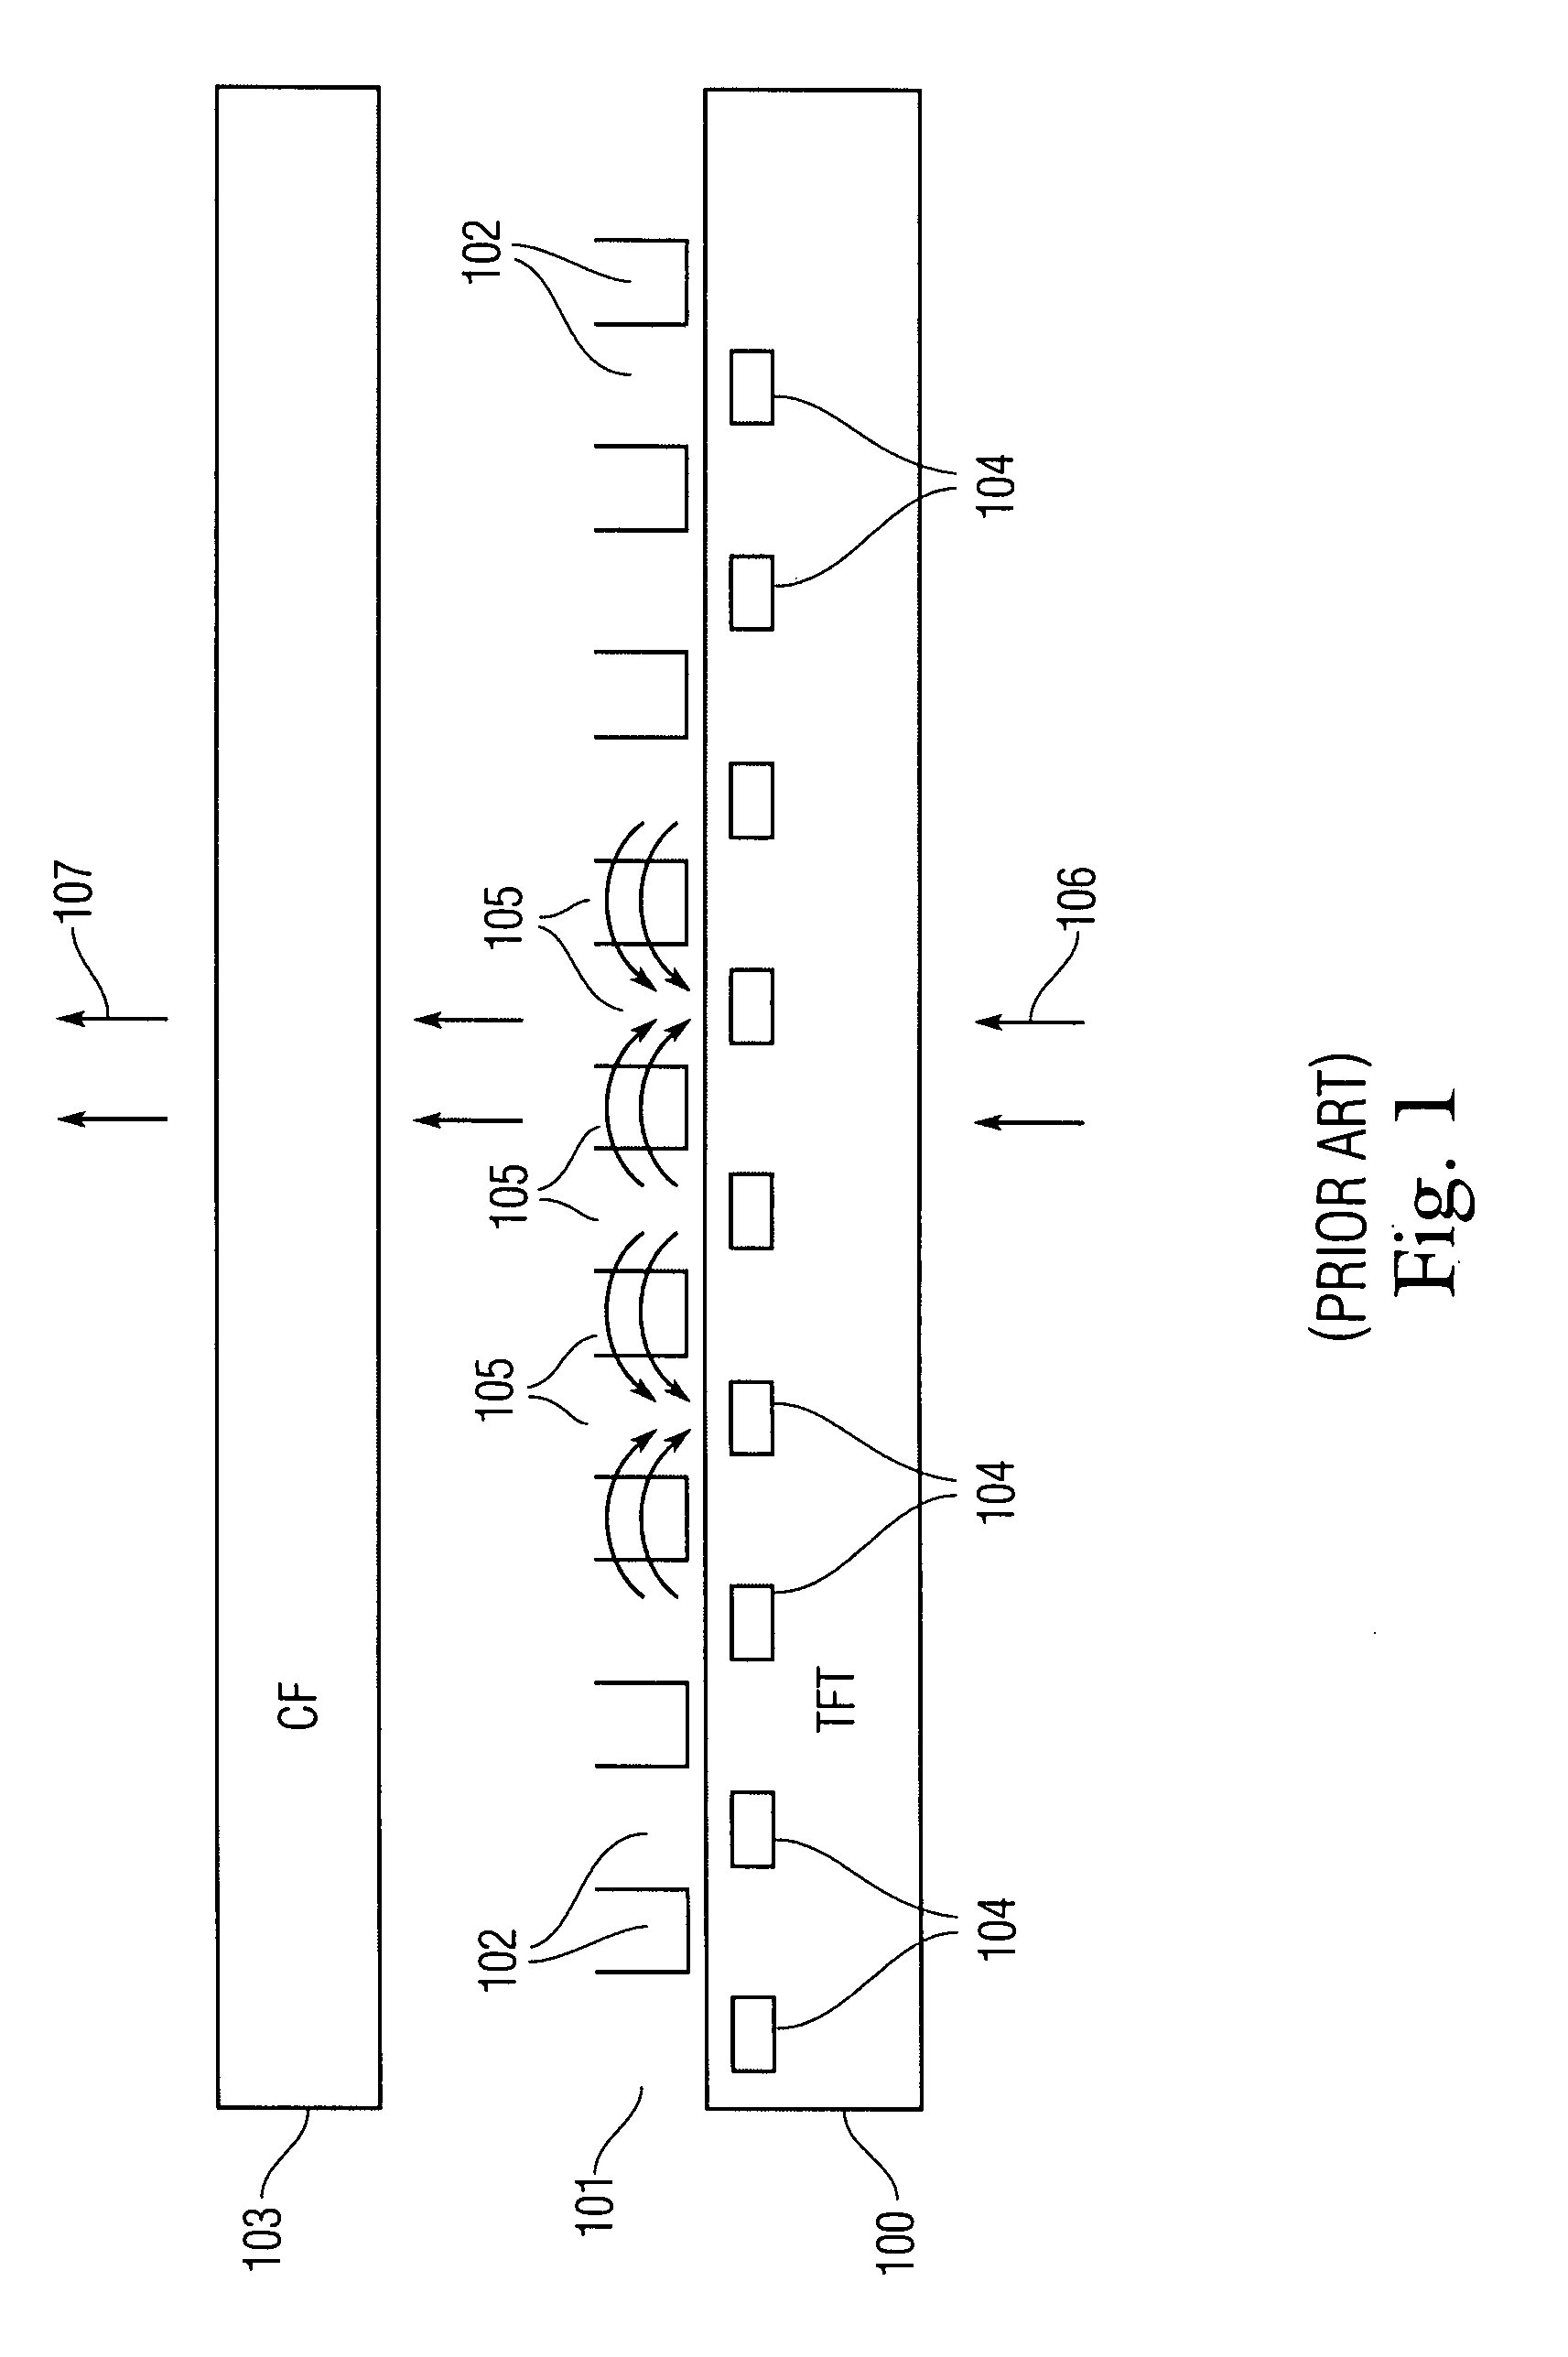 Integrated in-plane switching display and touch sensor